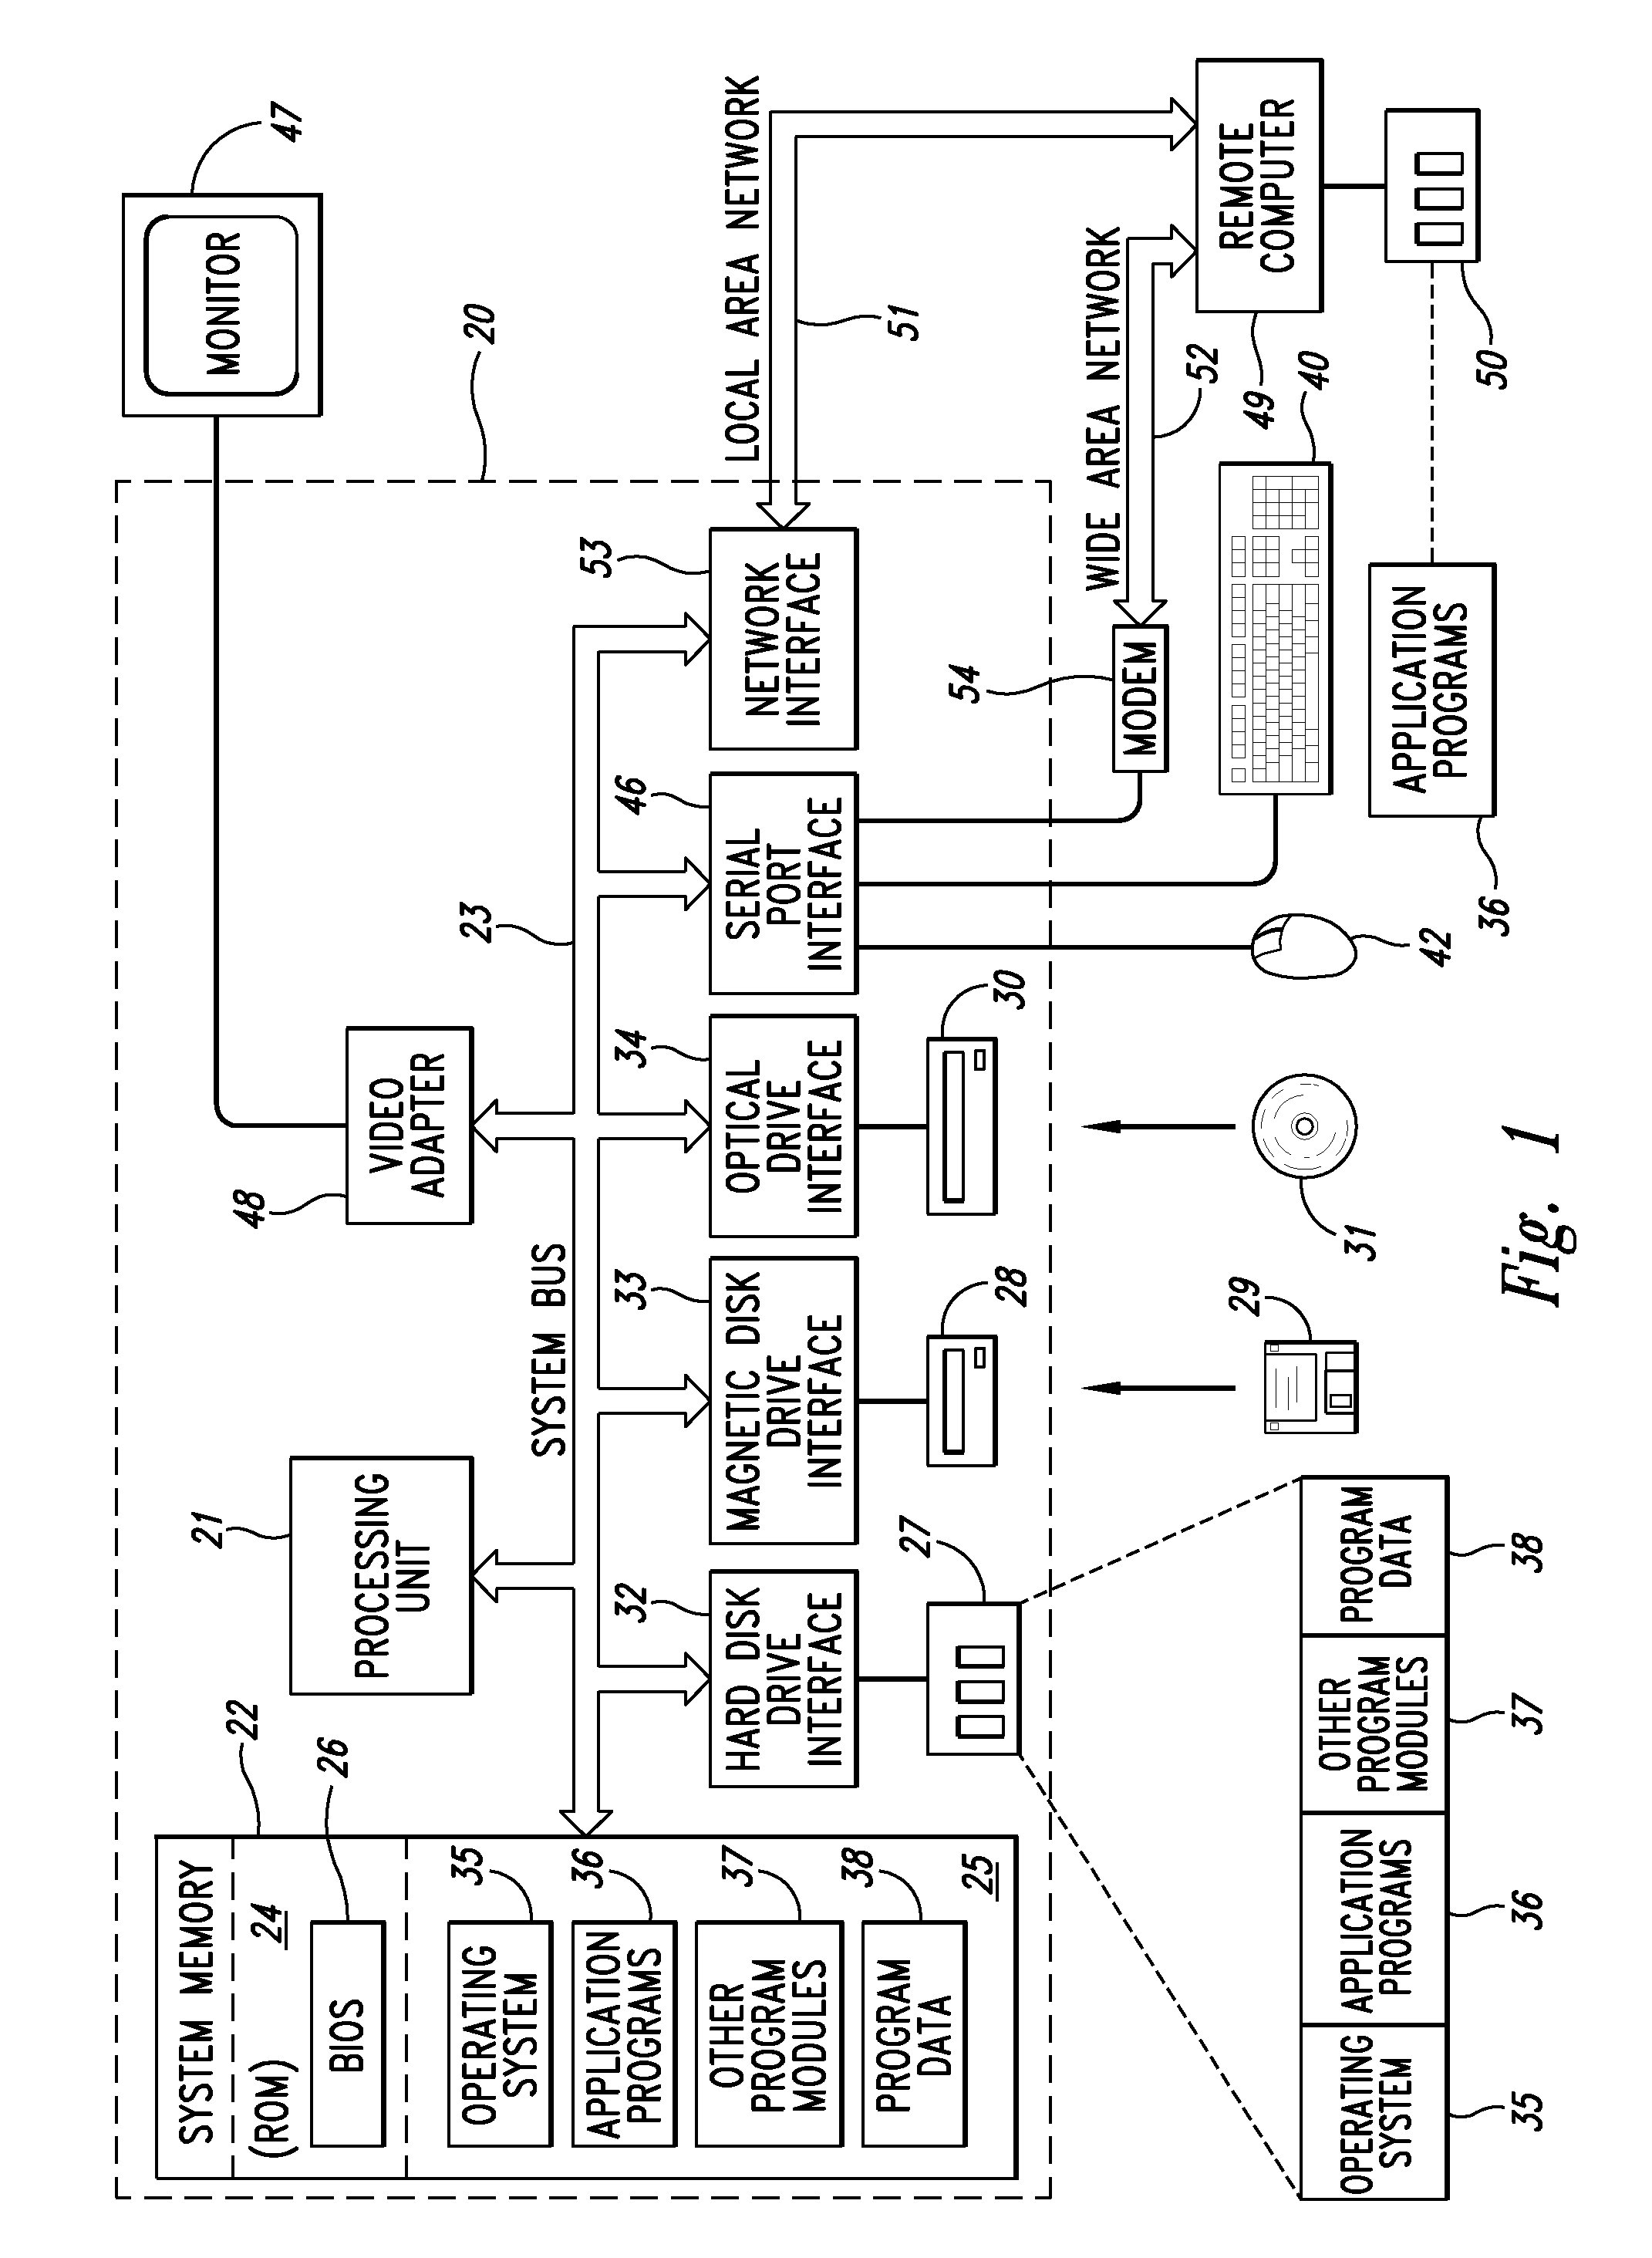 Session management system and method for use with stateless messaging services